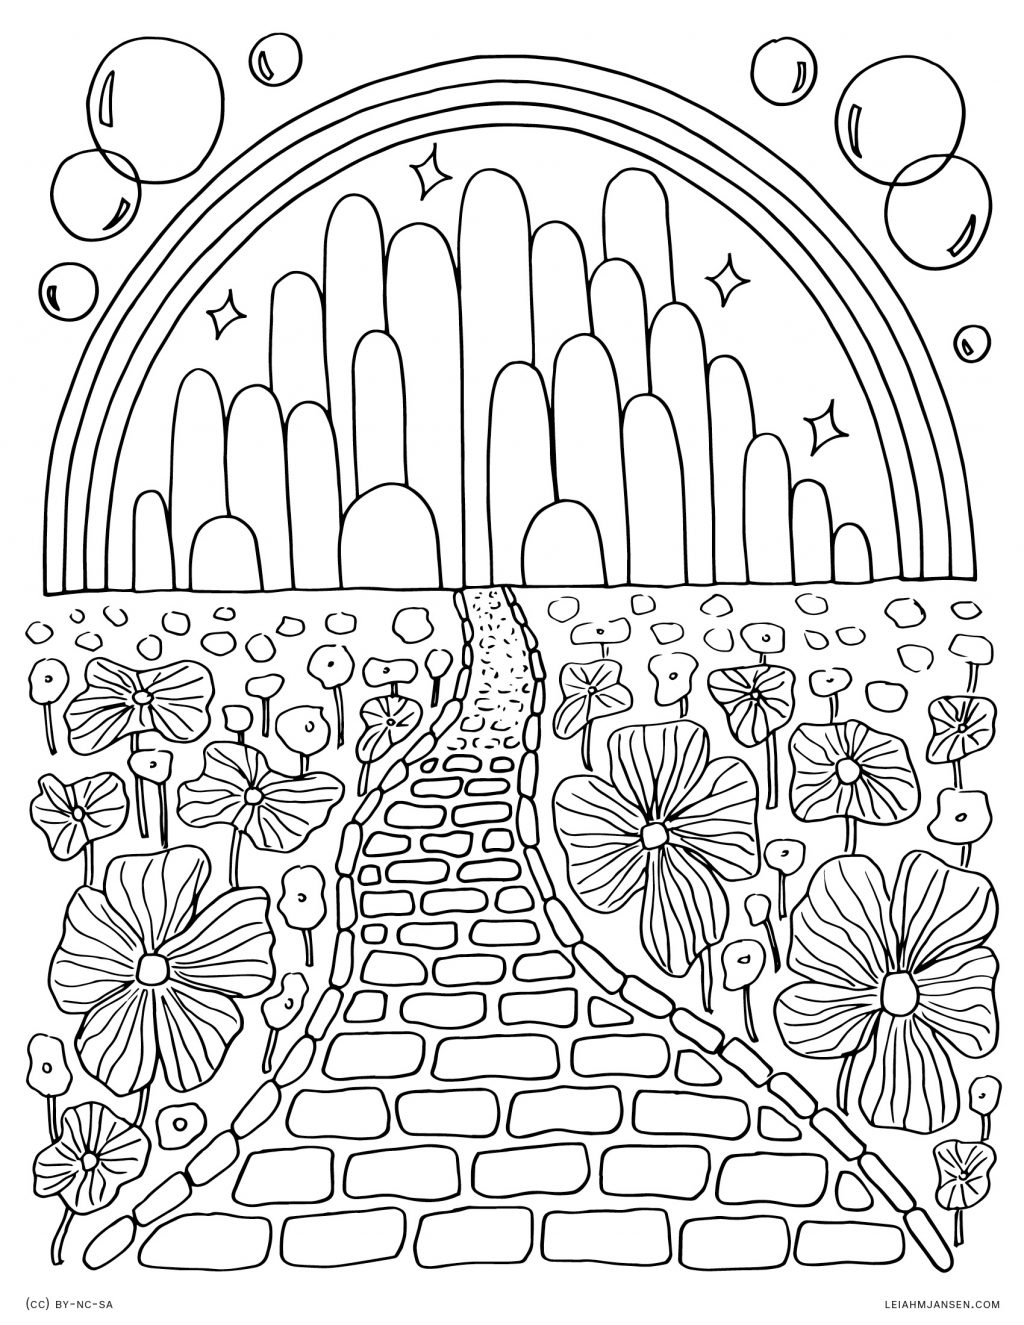 City Coloring Page Coloring Ideas Winsome Inspiration Emerald City Coloring Page